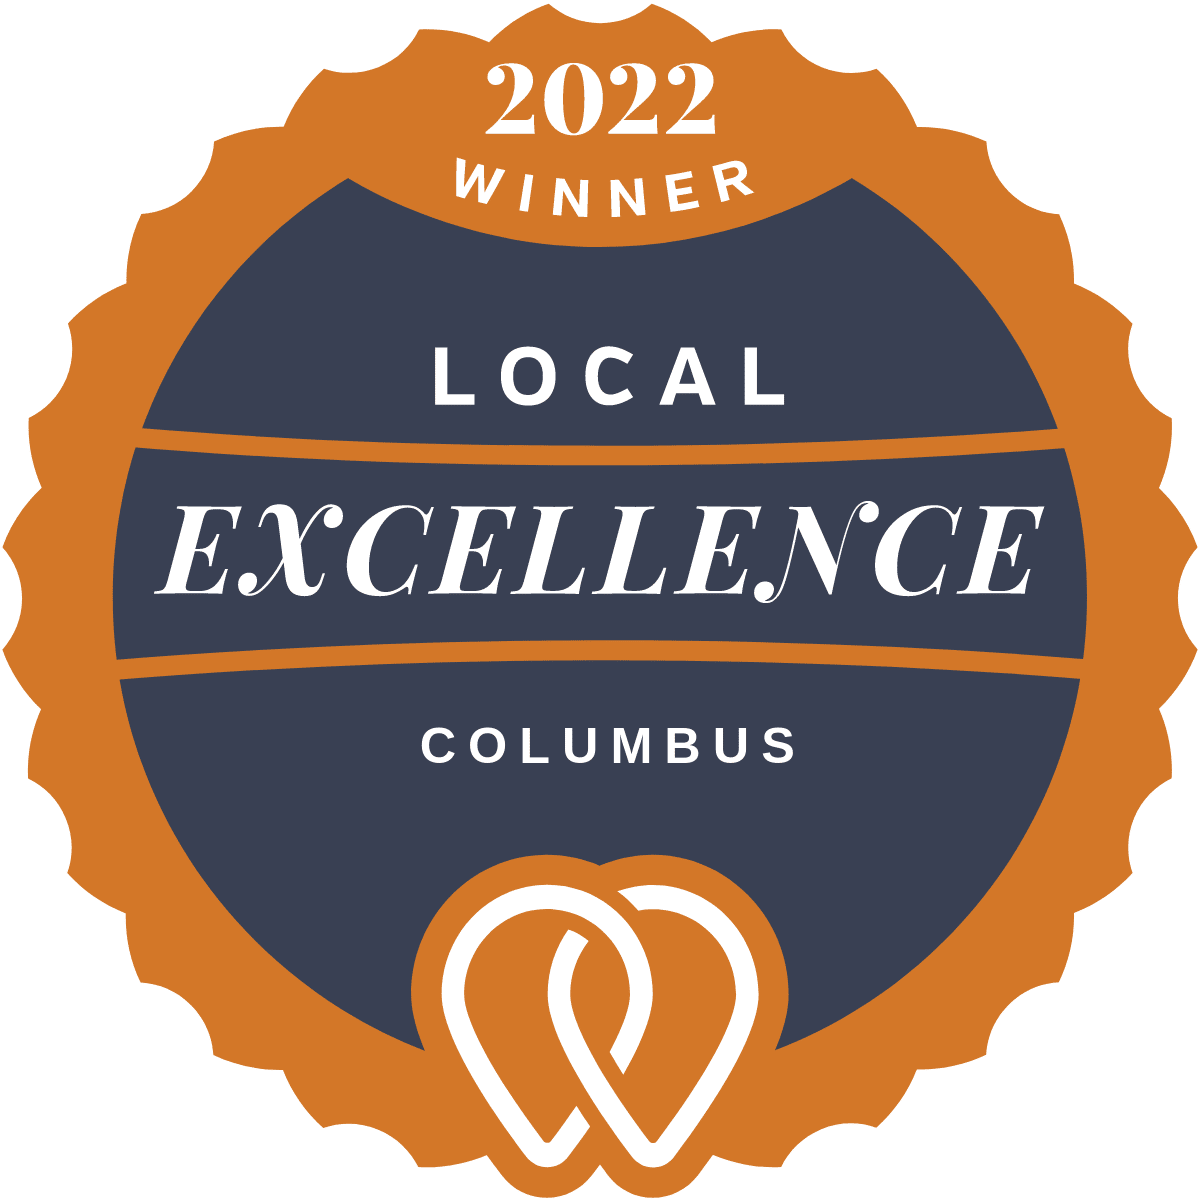 Local excellence award from Upcity